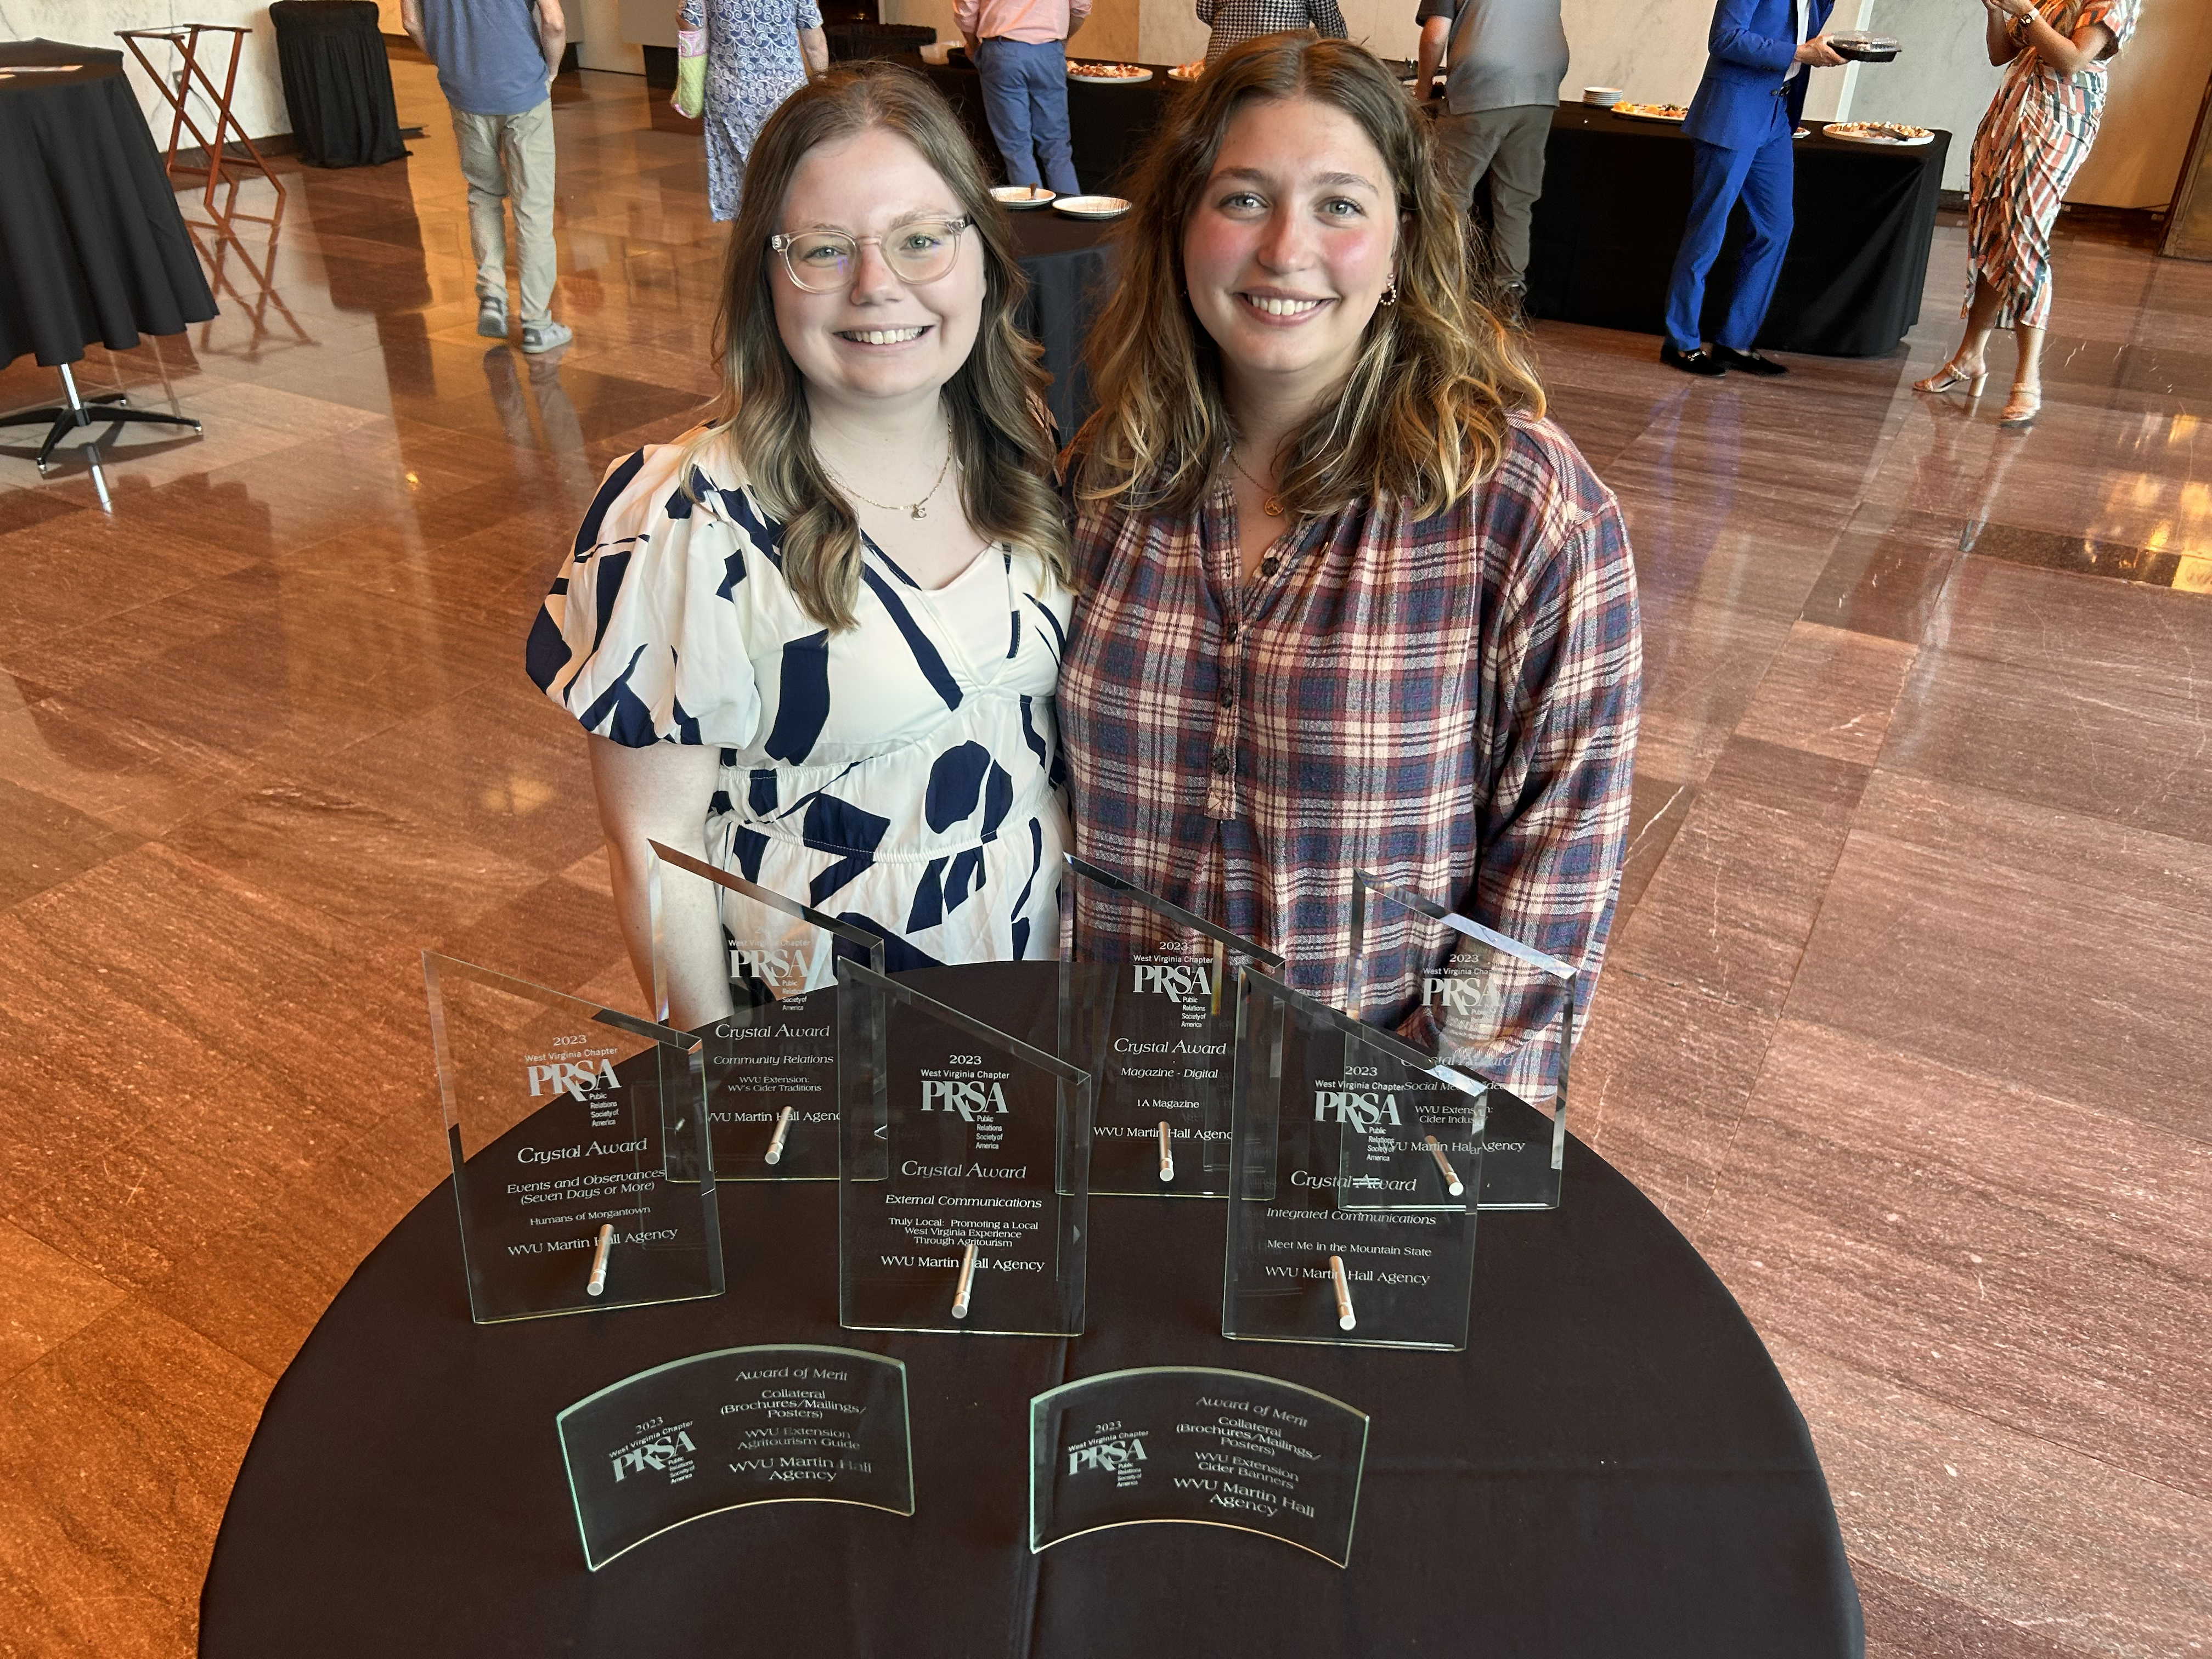 Cheyenne Oakes and Emma Magruder with PRSA Crystal Awards